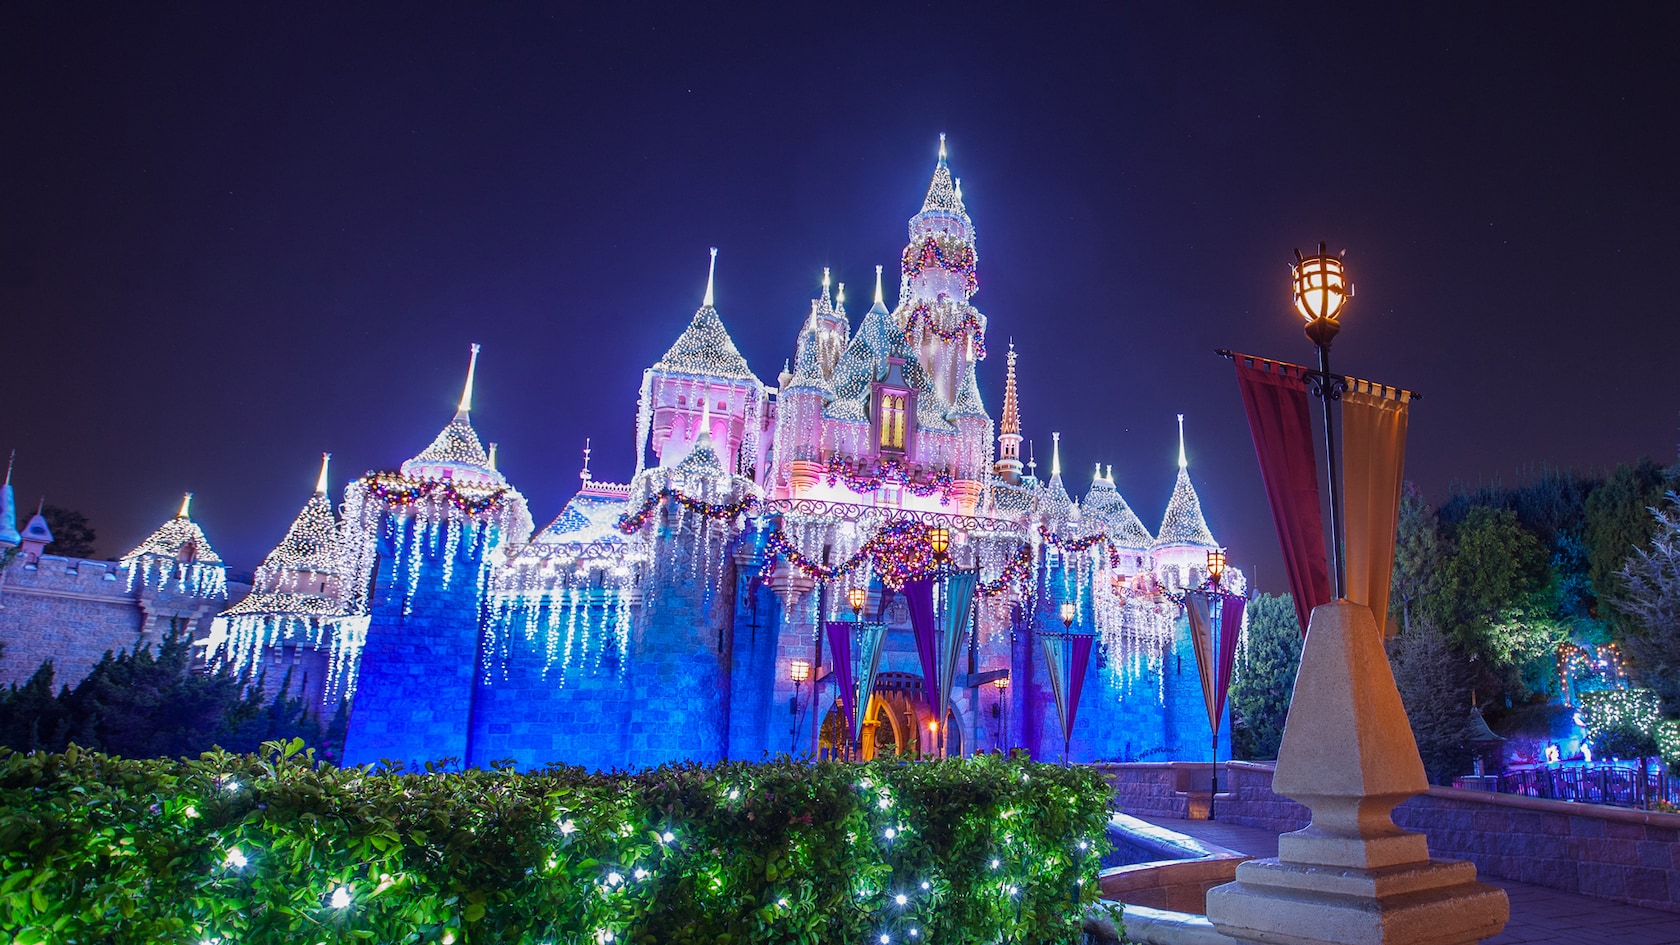 When Will Disney World Decorate For Christmas 2021